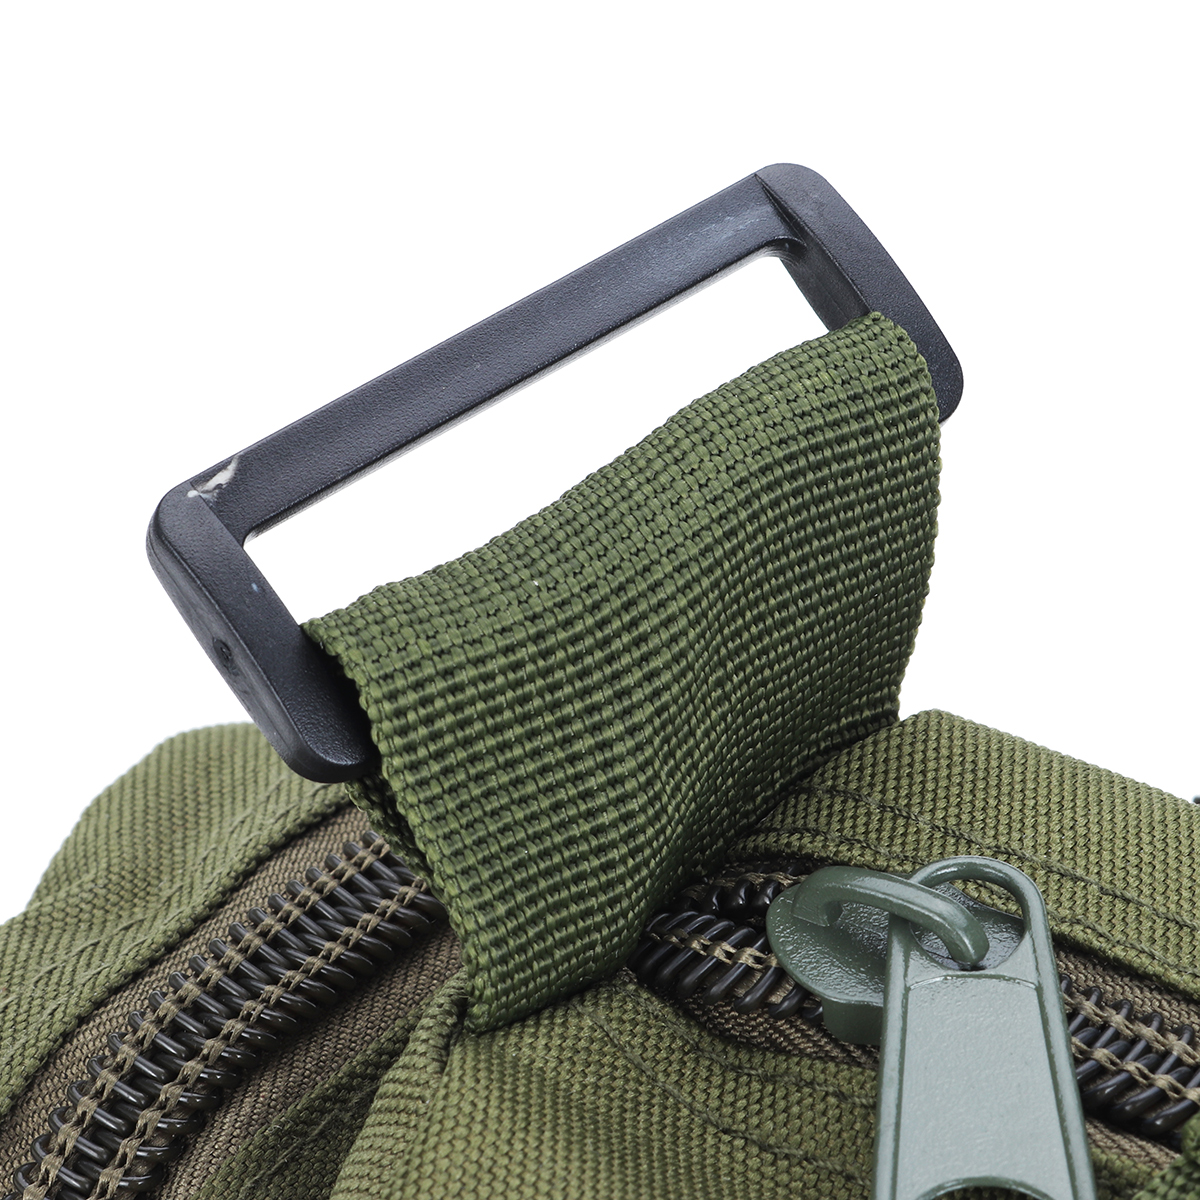 Multifunctional-Outdoor-Sports-Hiking-with-Zippers-Nylon-Oxford-Cloth-Tactical-Shoulder-Bag-Waist-Pa-1825563-20